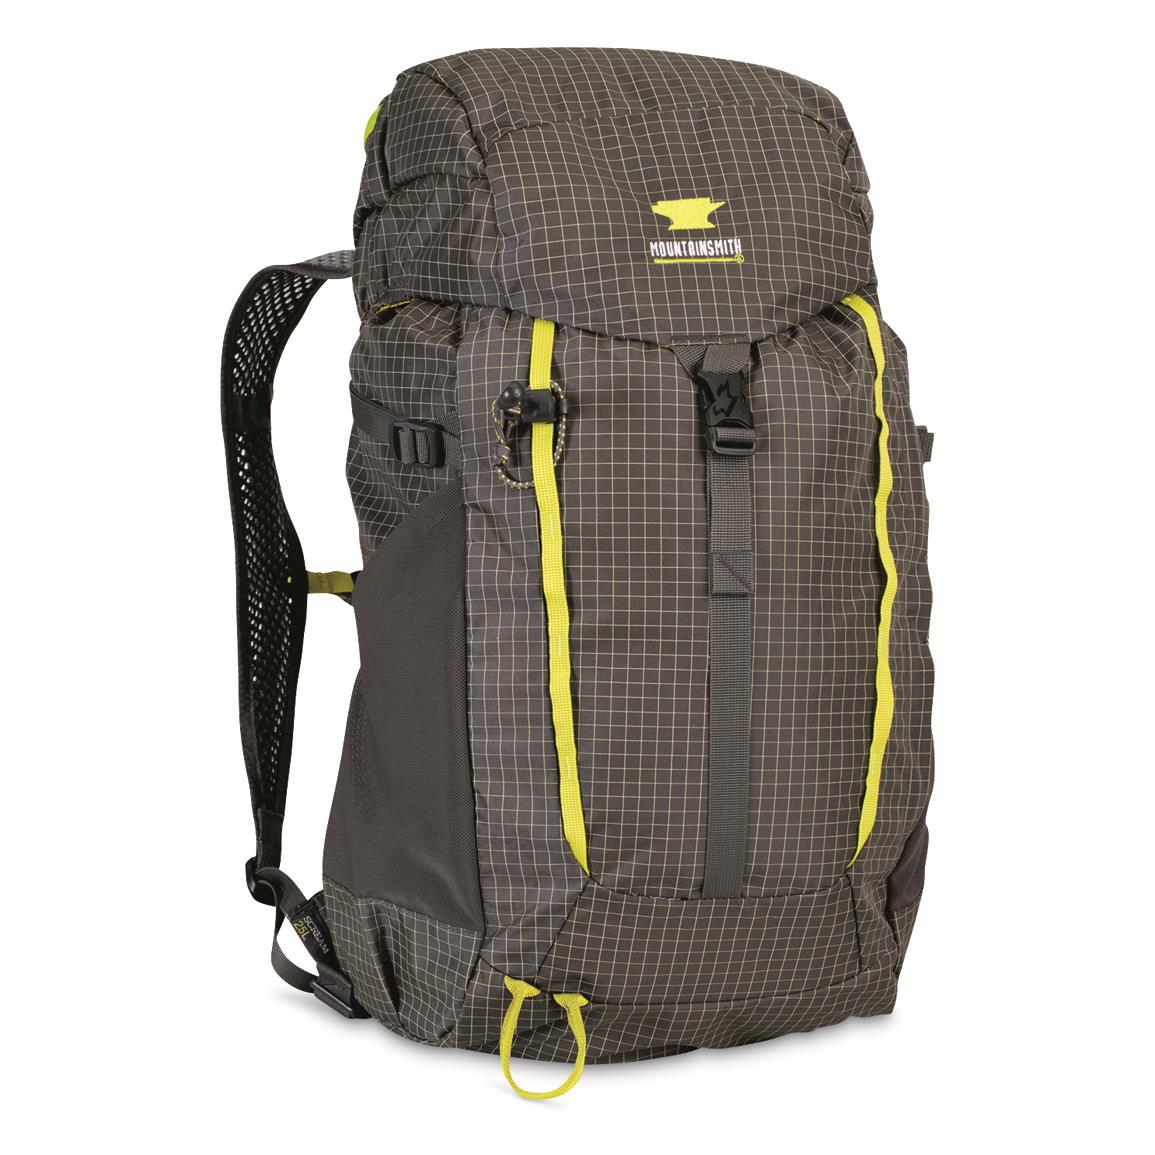 Mountainsmith Scream 25 Backpack - 704634, Camping Backpacks & Bags at Sportsman's Guide